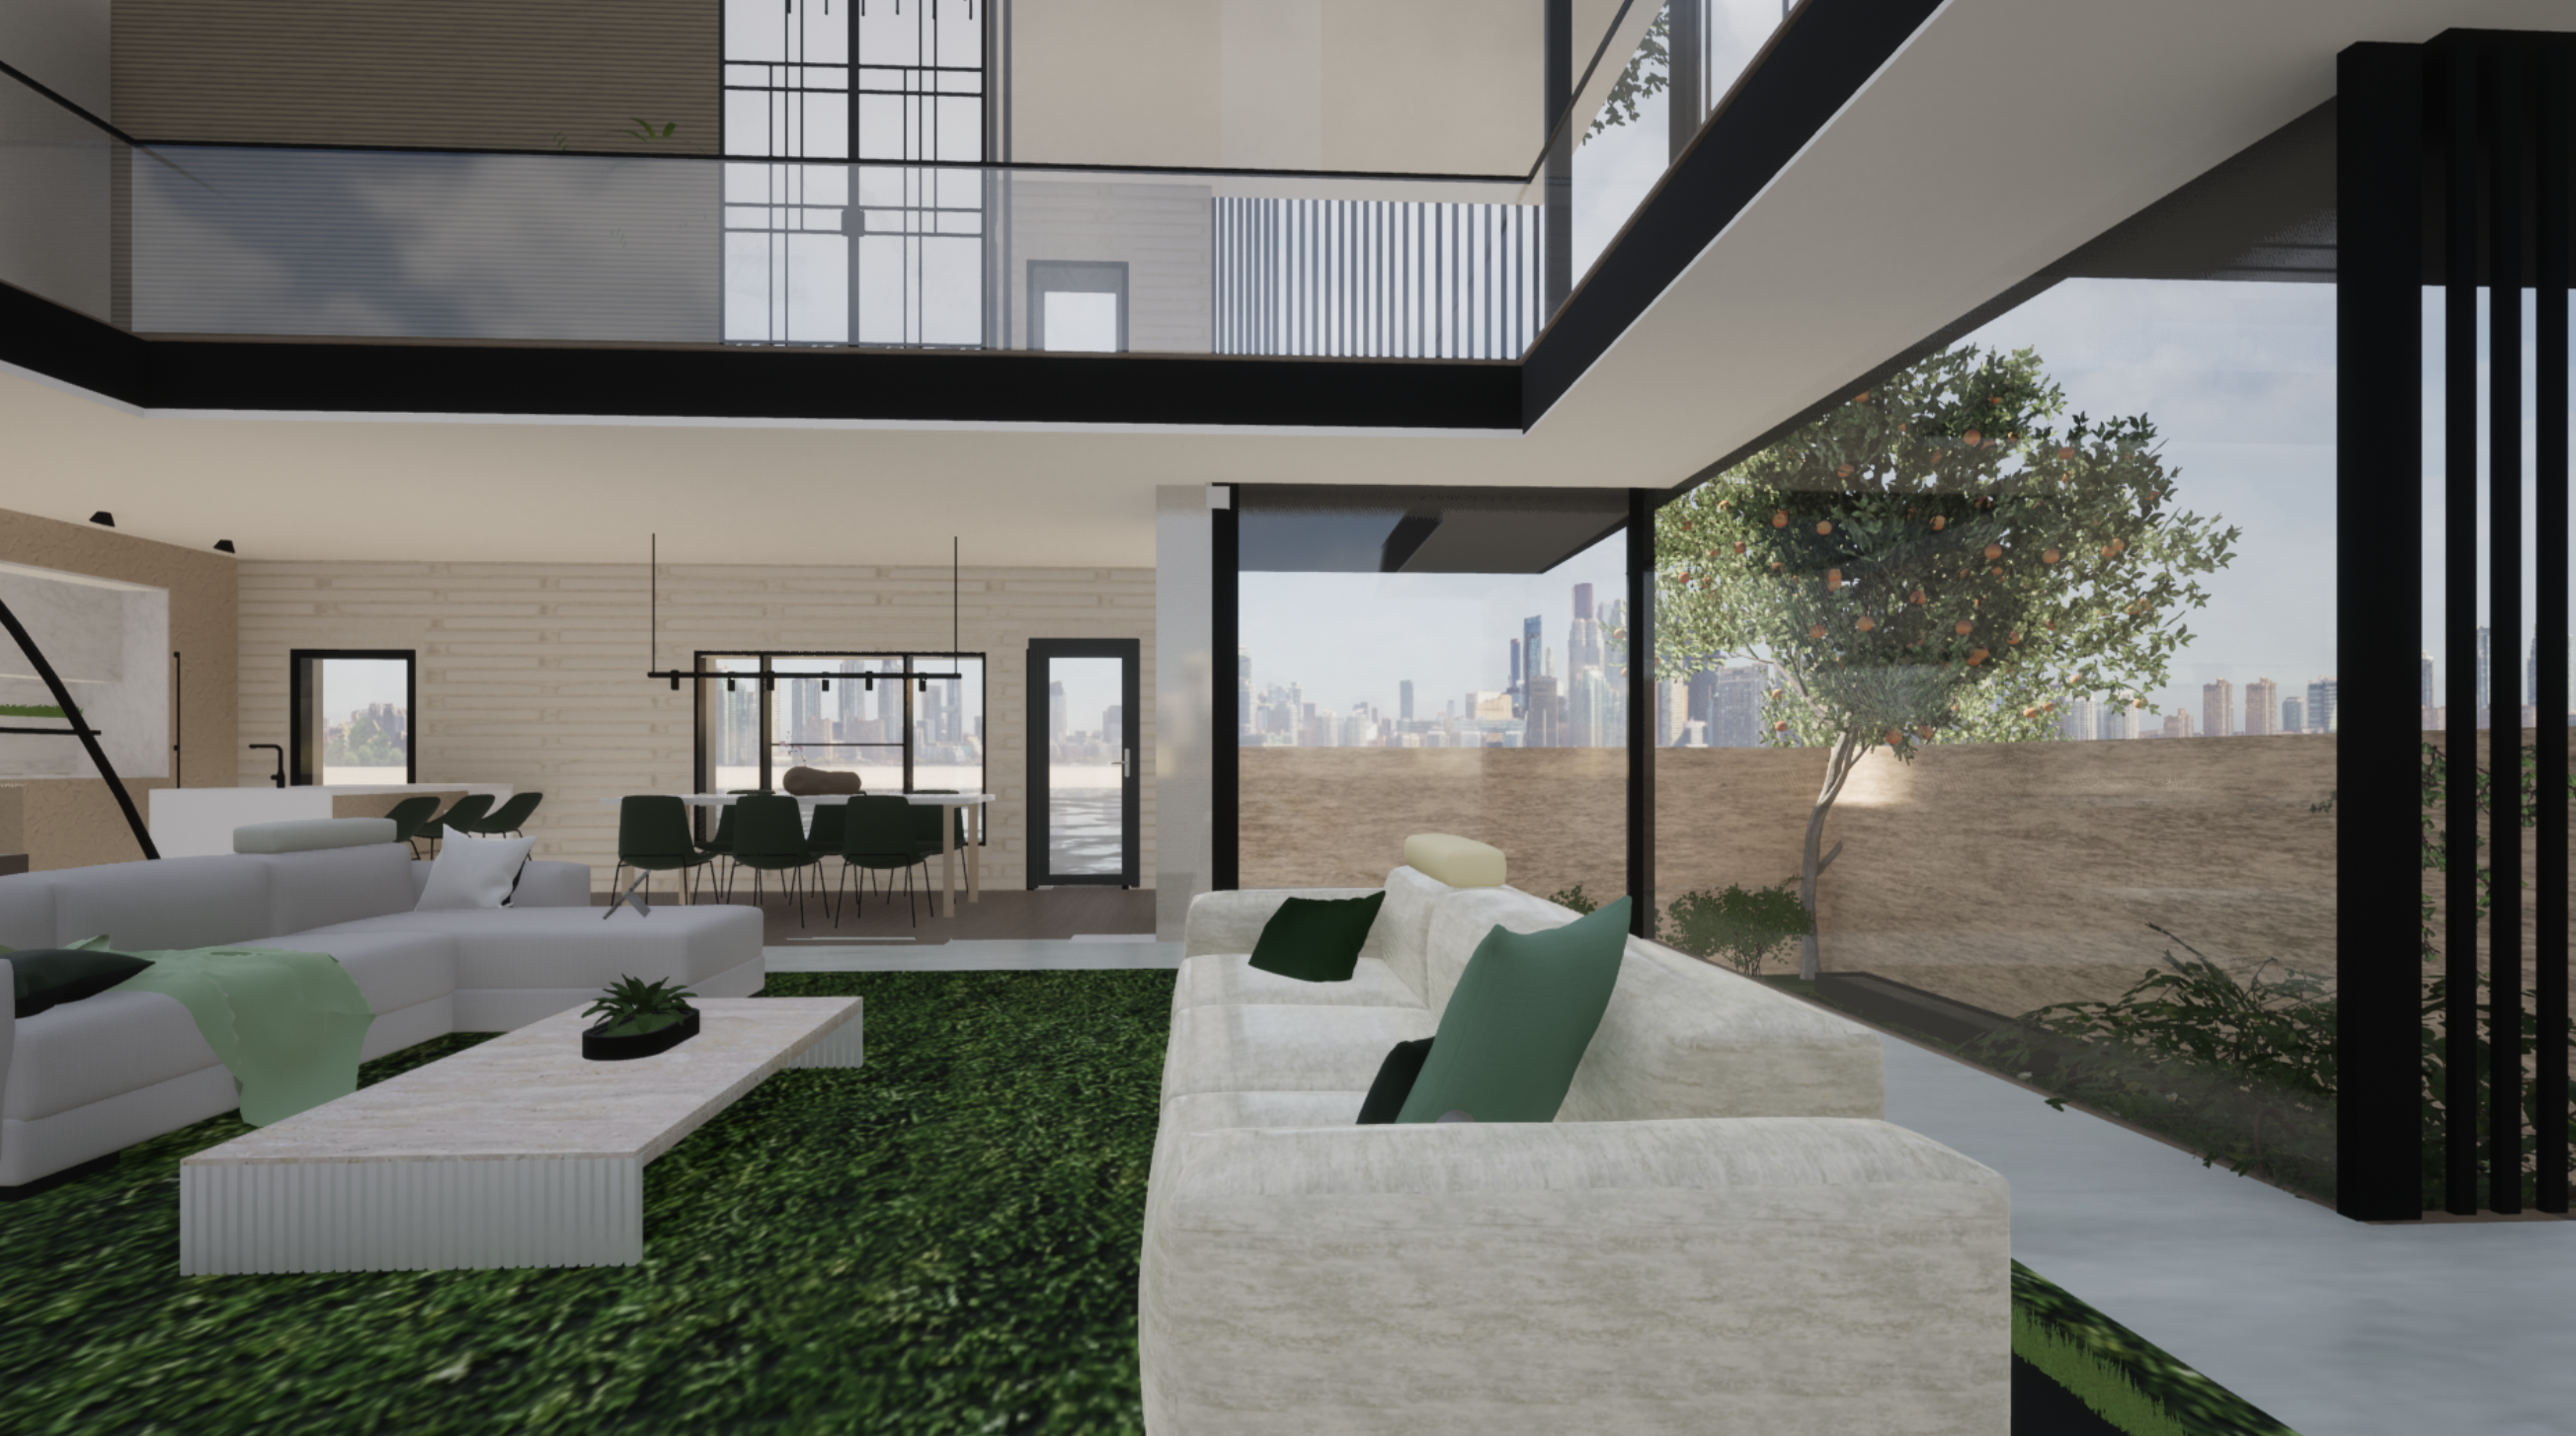 Bulwer St. Residence Perspective